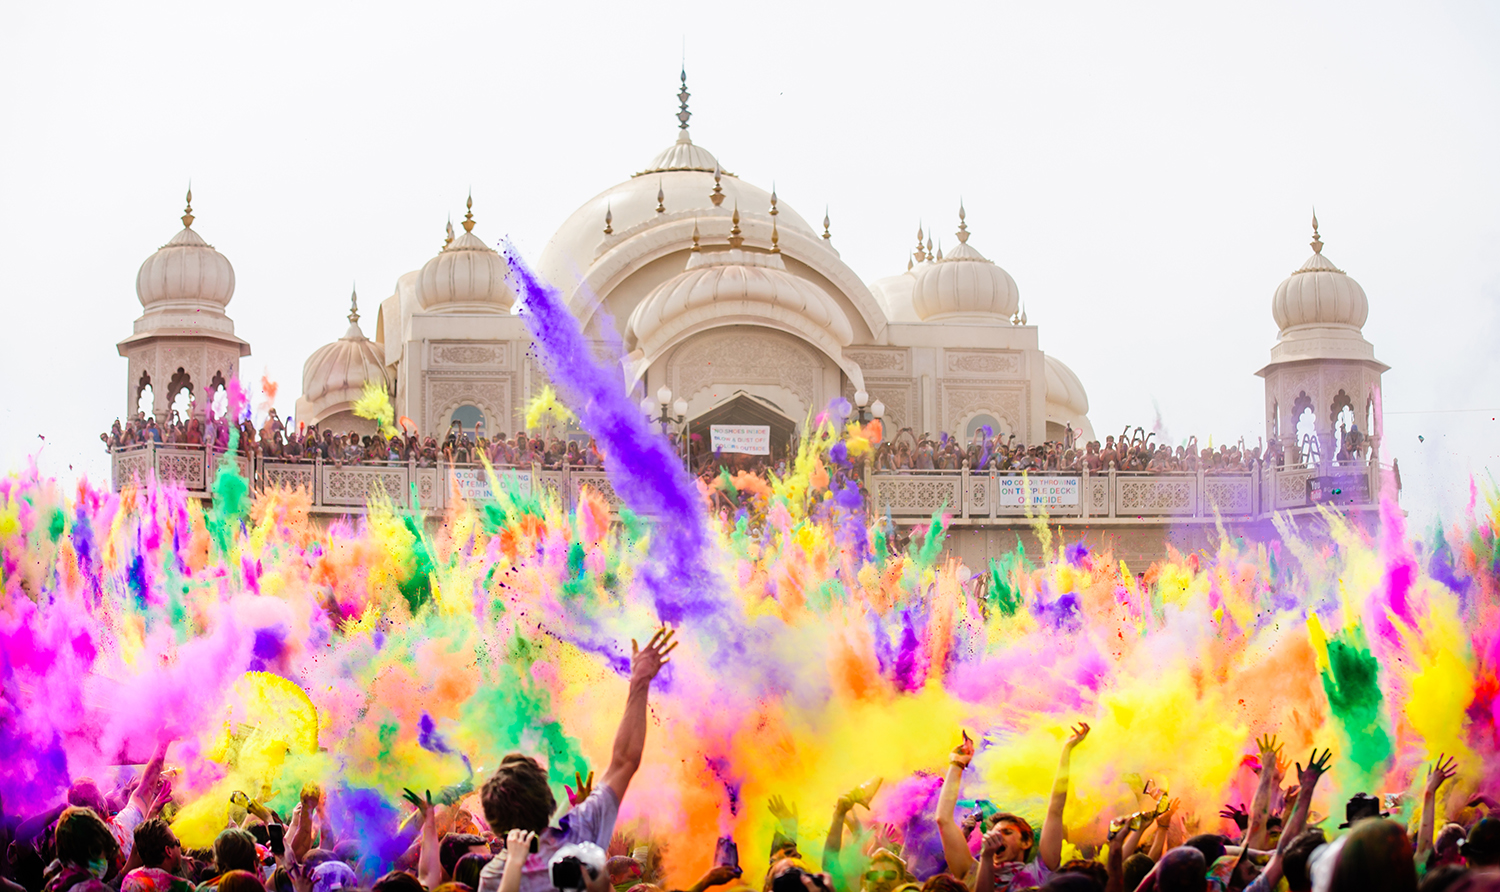 The Hindu tradition of Holi is one of the Hindu festivals that has been adopted by many Americans.  The recognizable pop of color can now be found at events and festivals across the US.  Courtesy of the photo